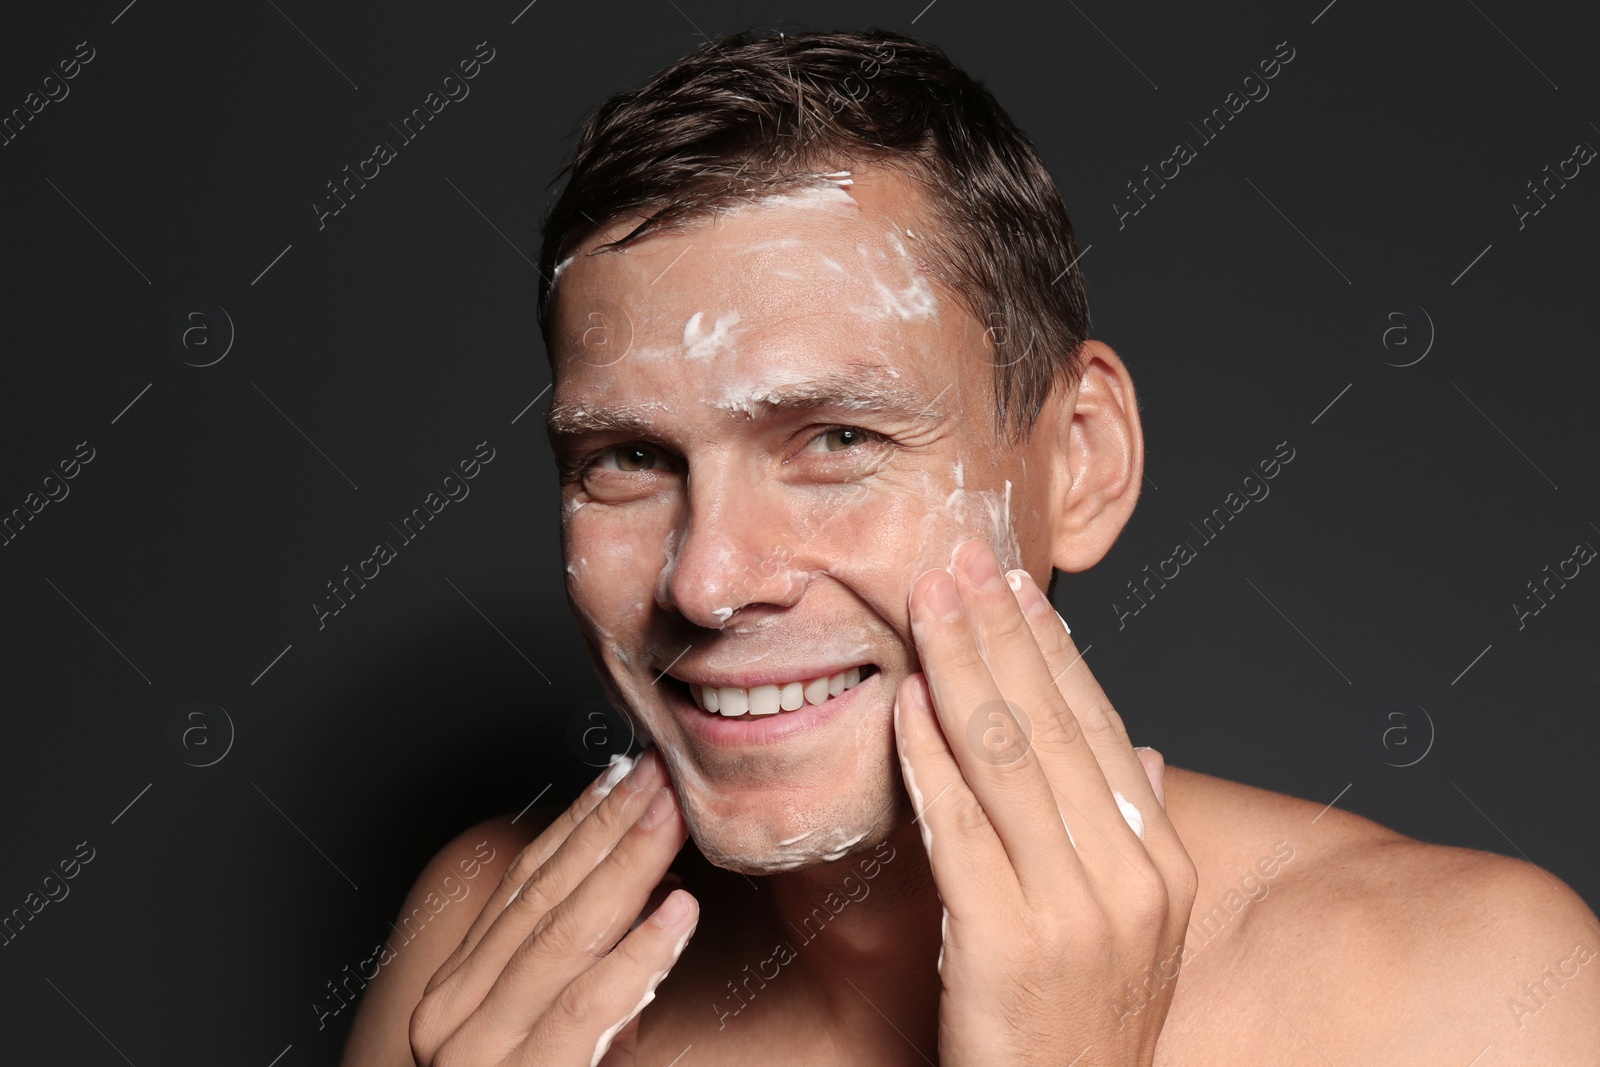 Photo of Man washing face with soap on dark background